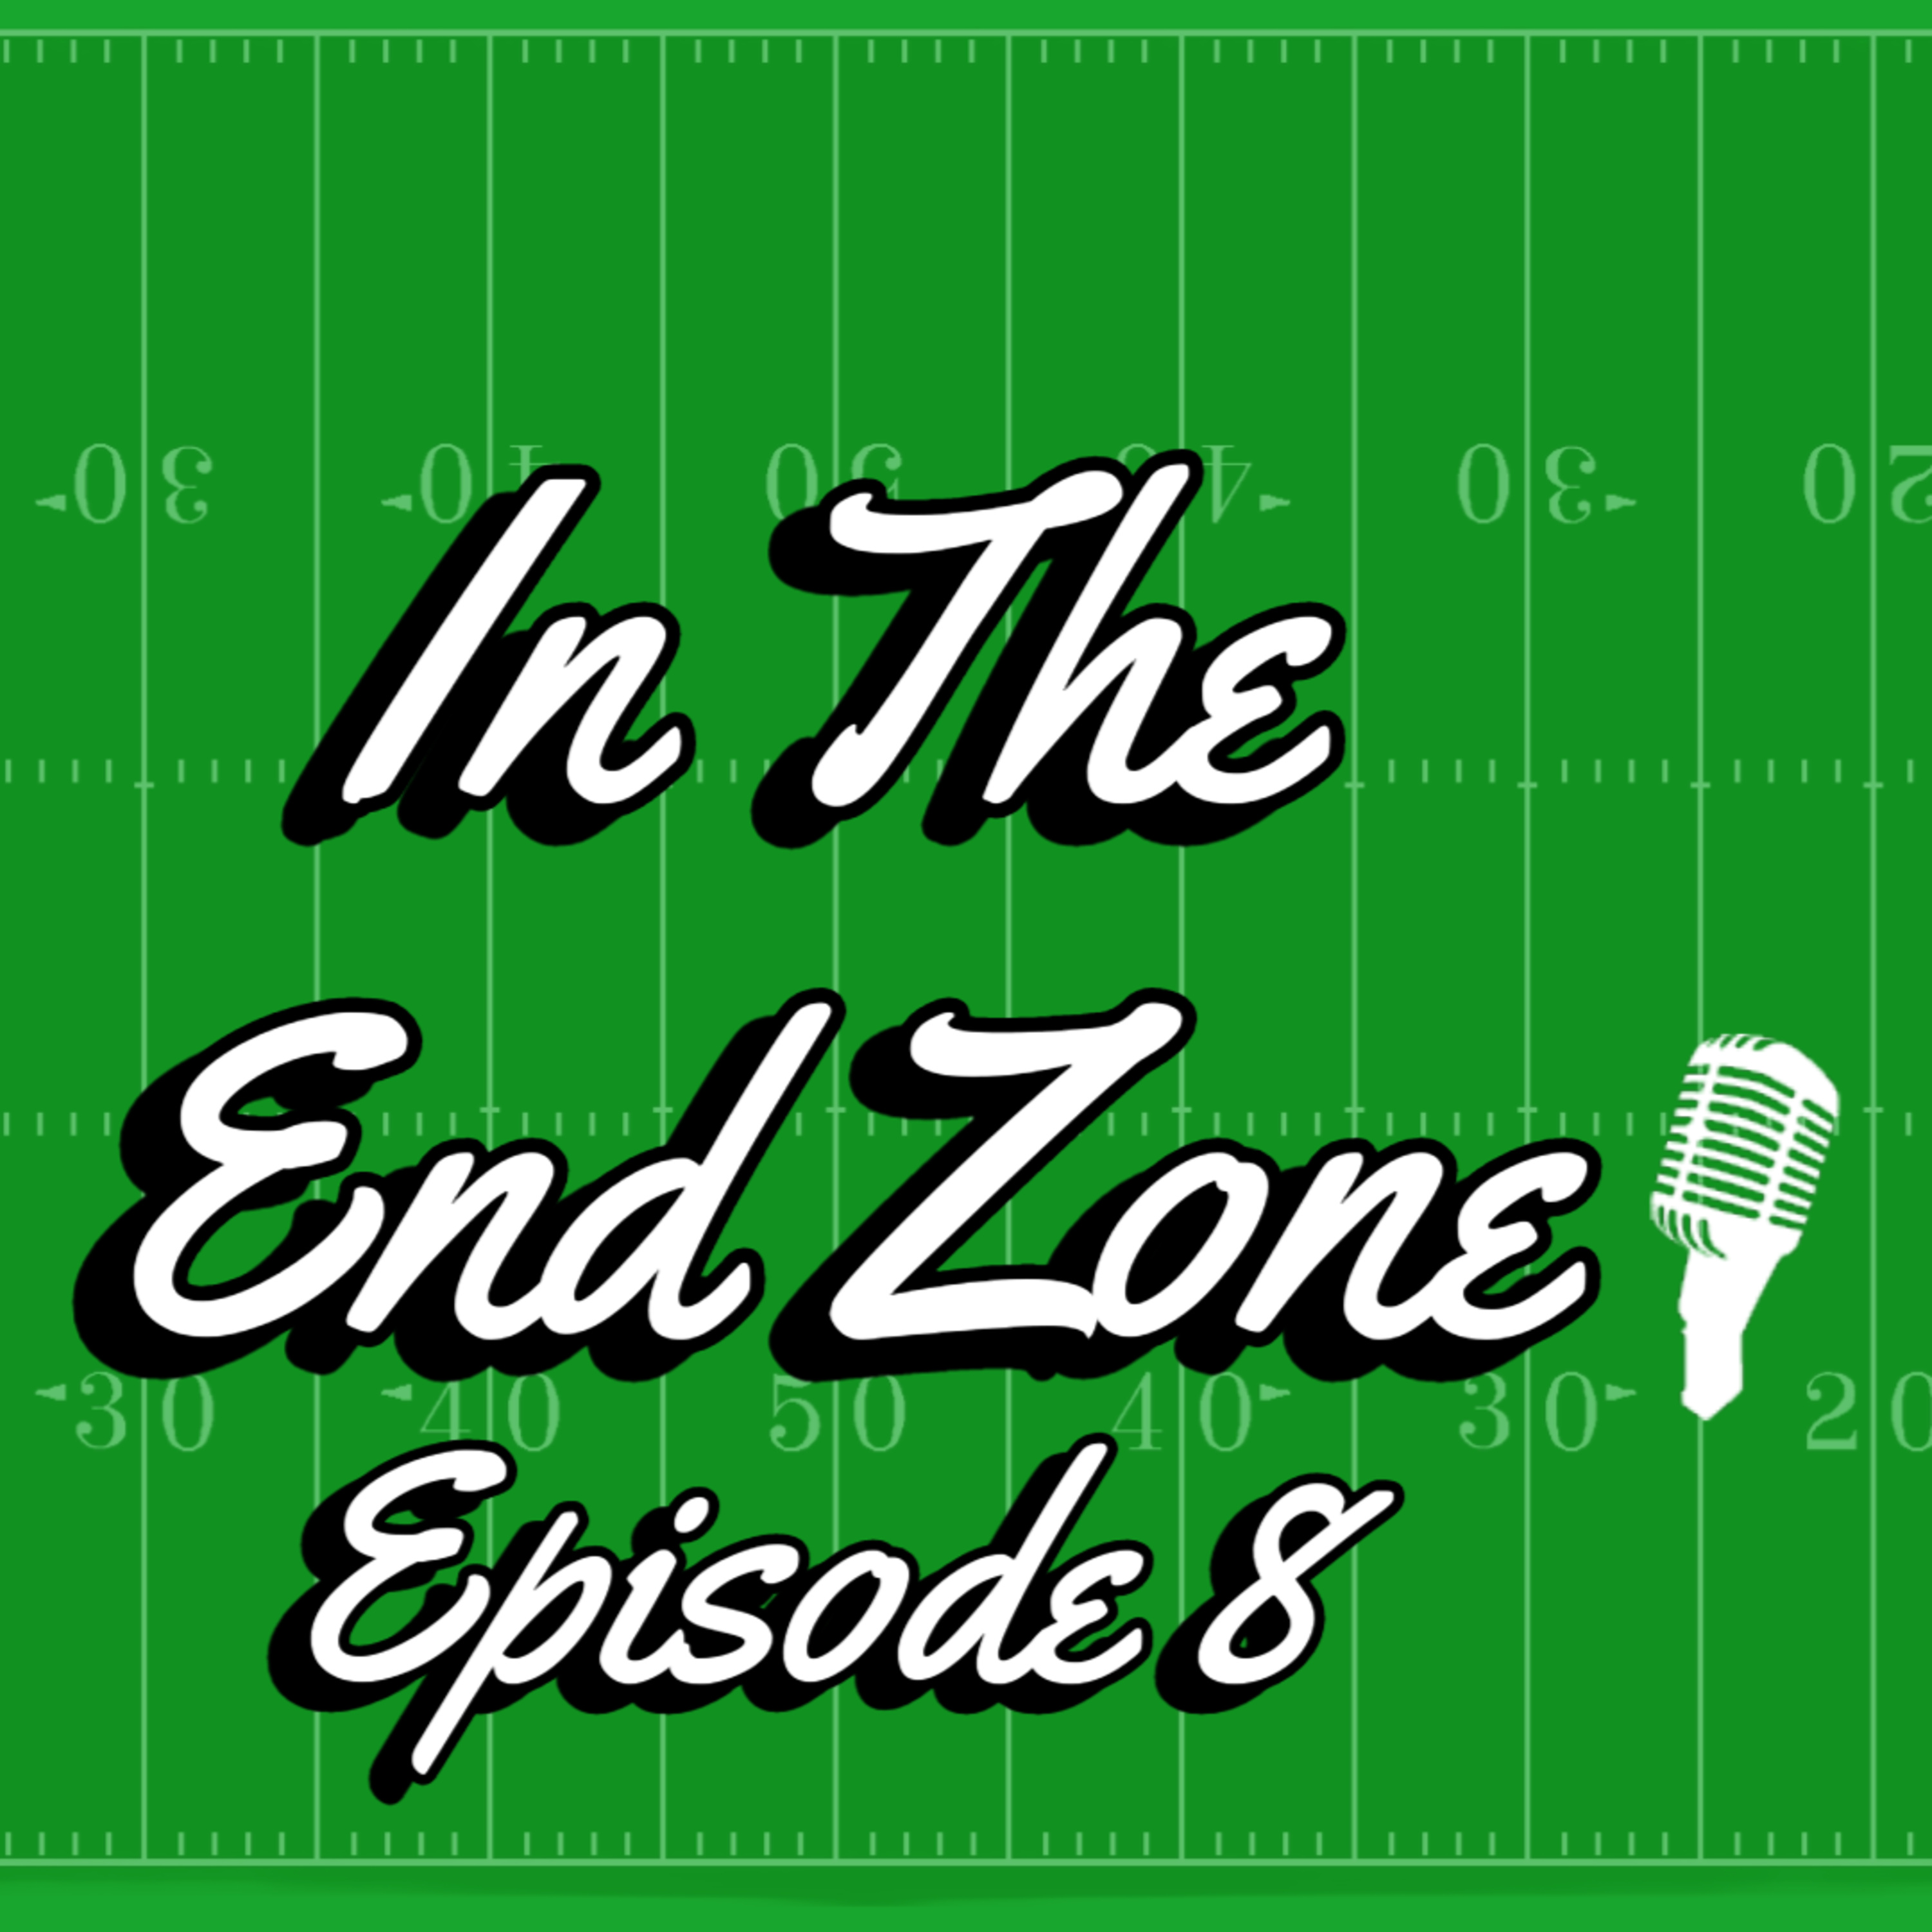 In The EndZone Episode 8